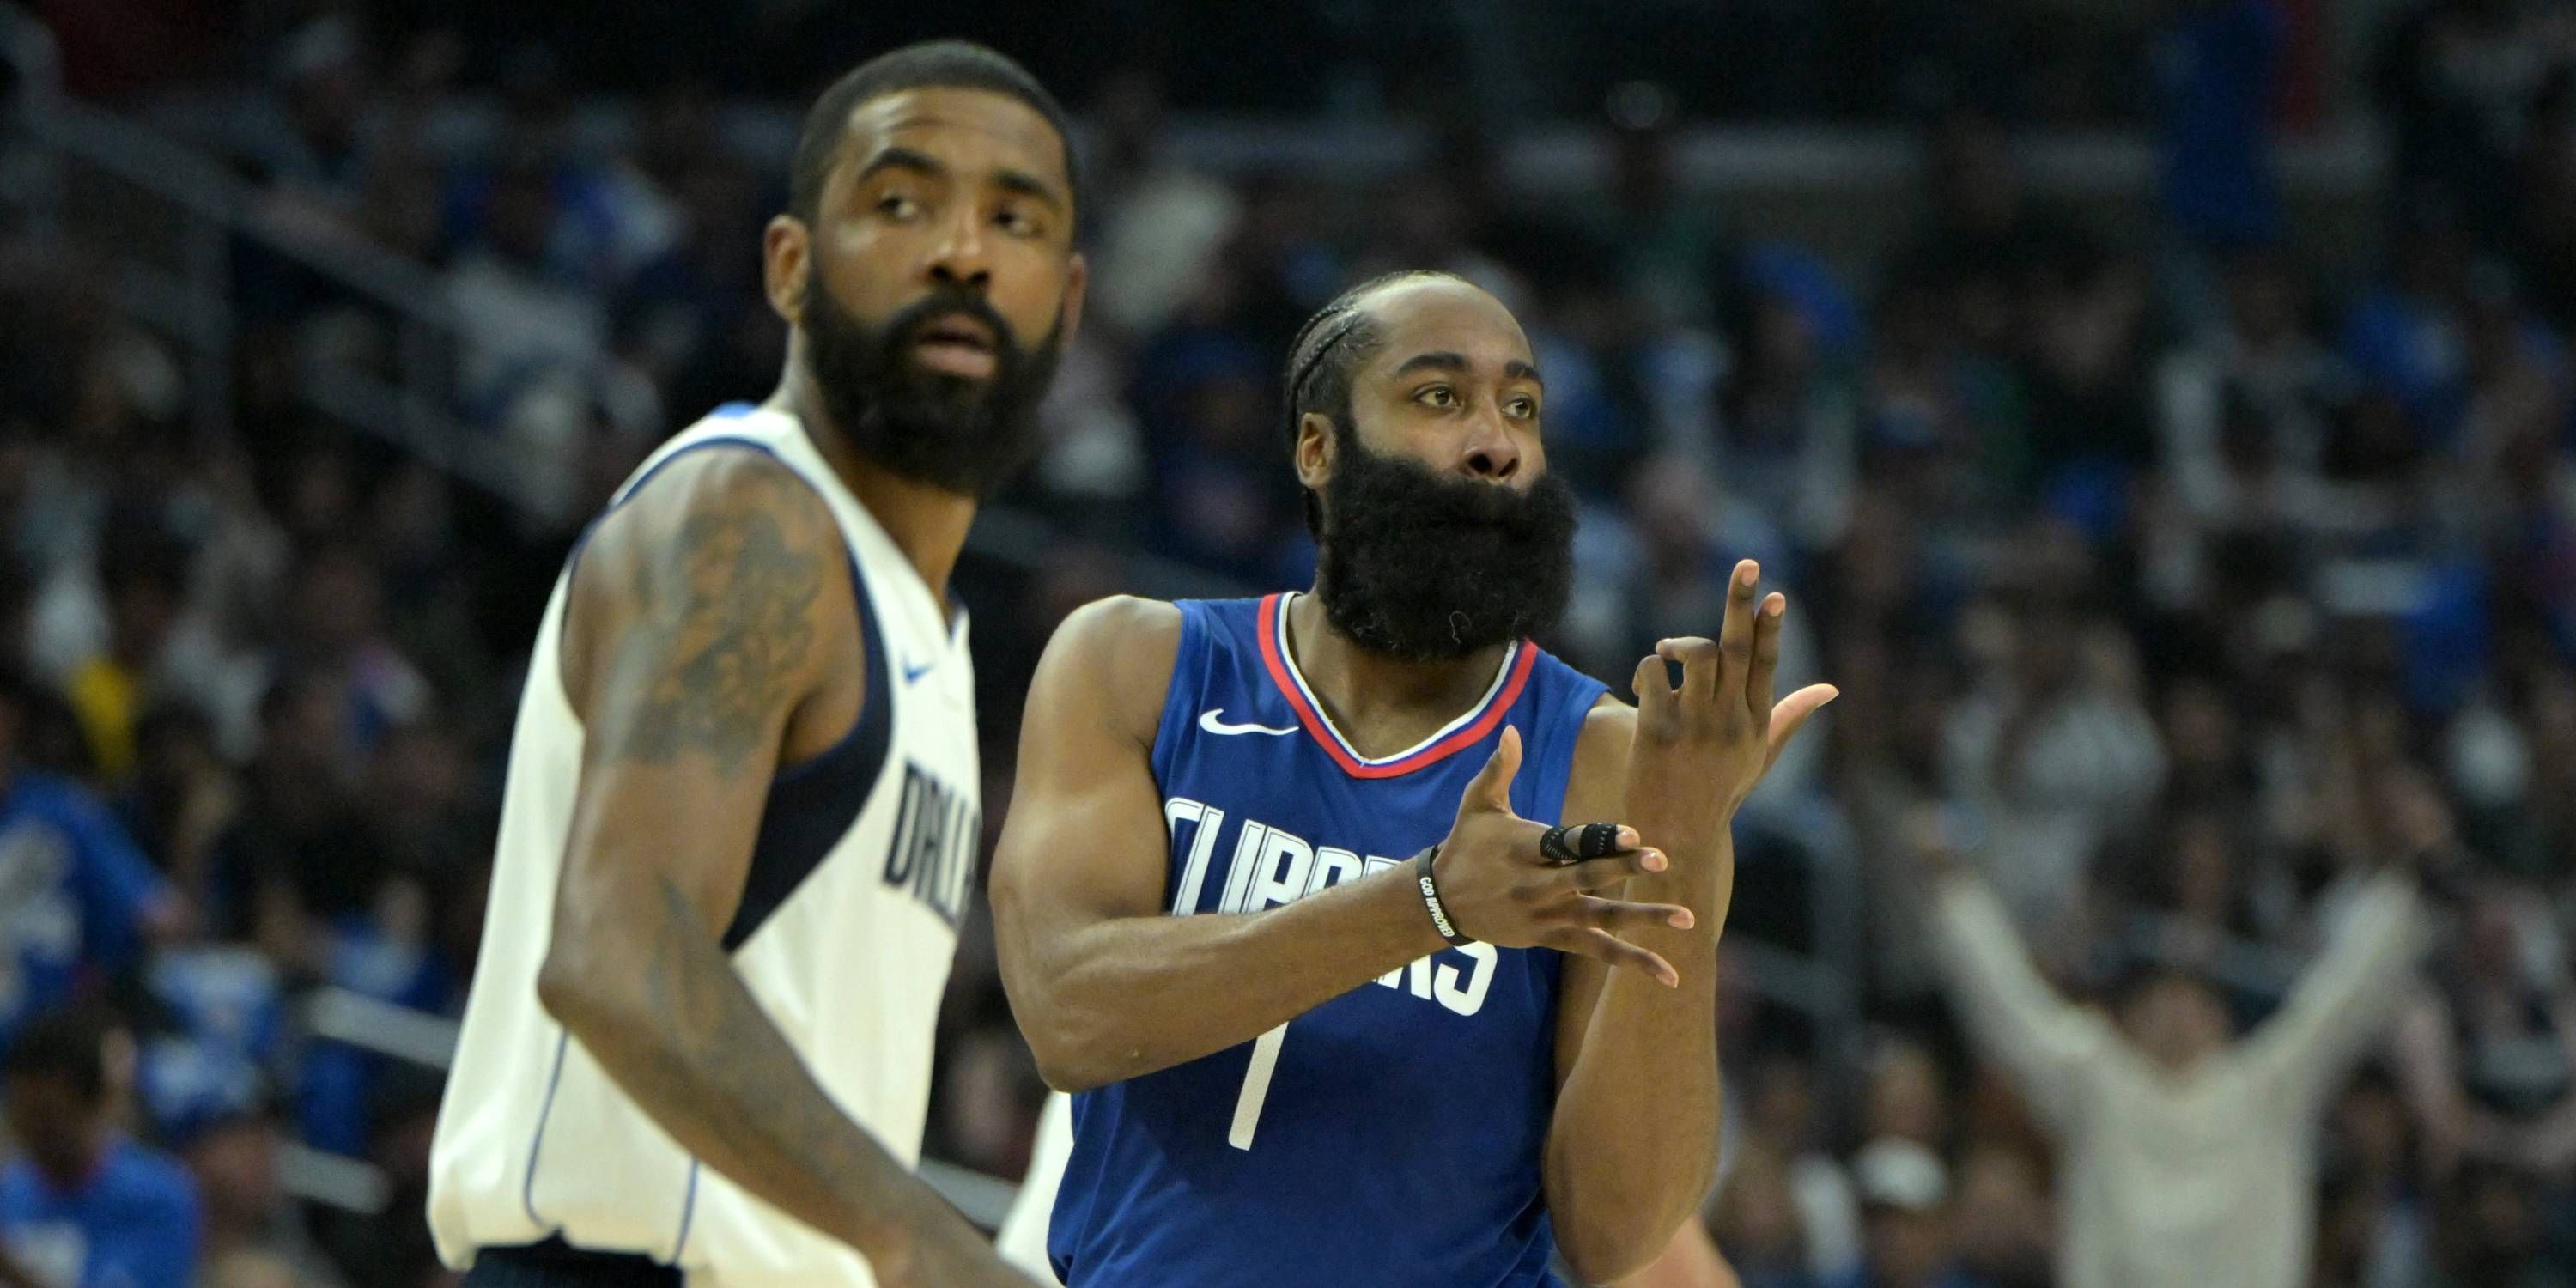 James Harden reacts after a play against the Mavericks.